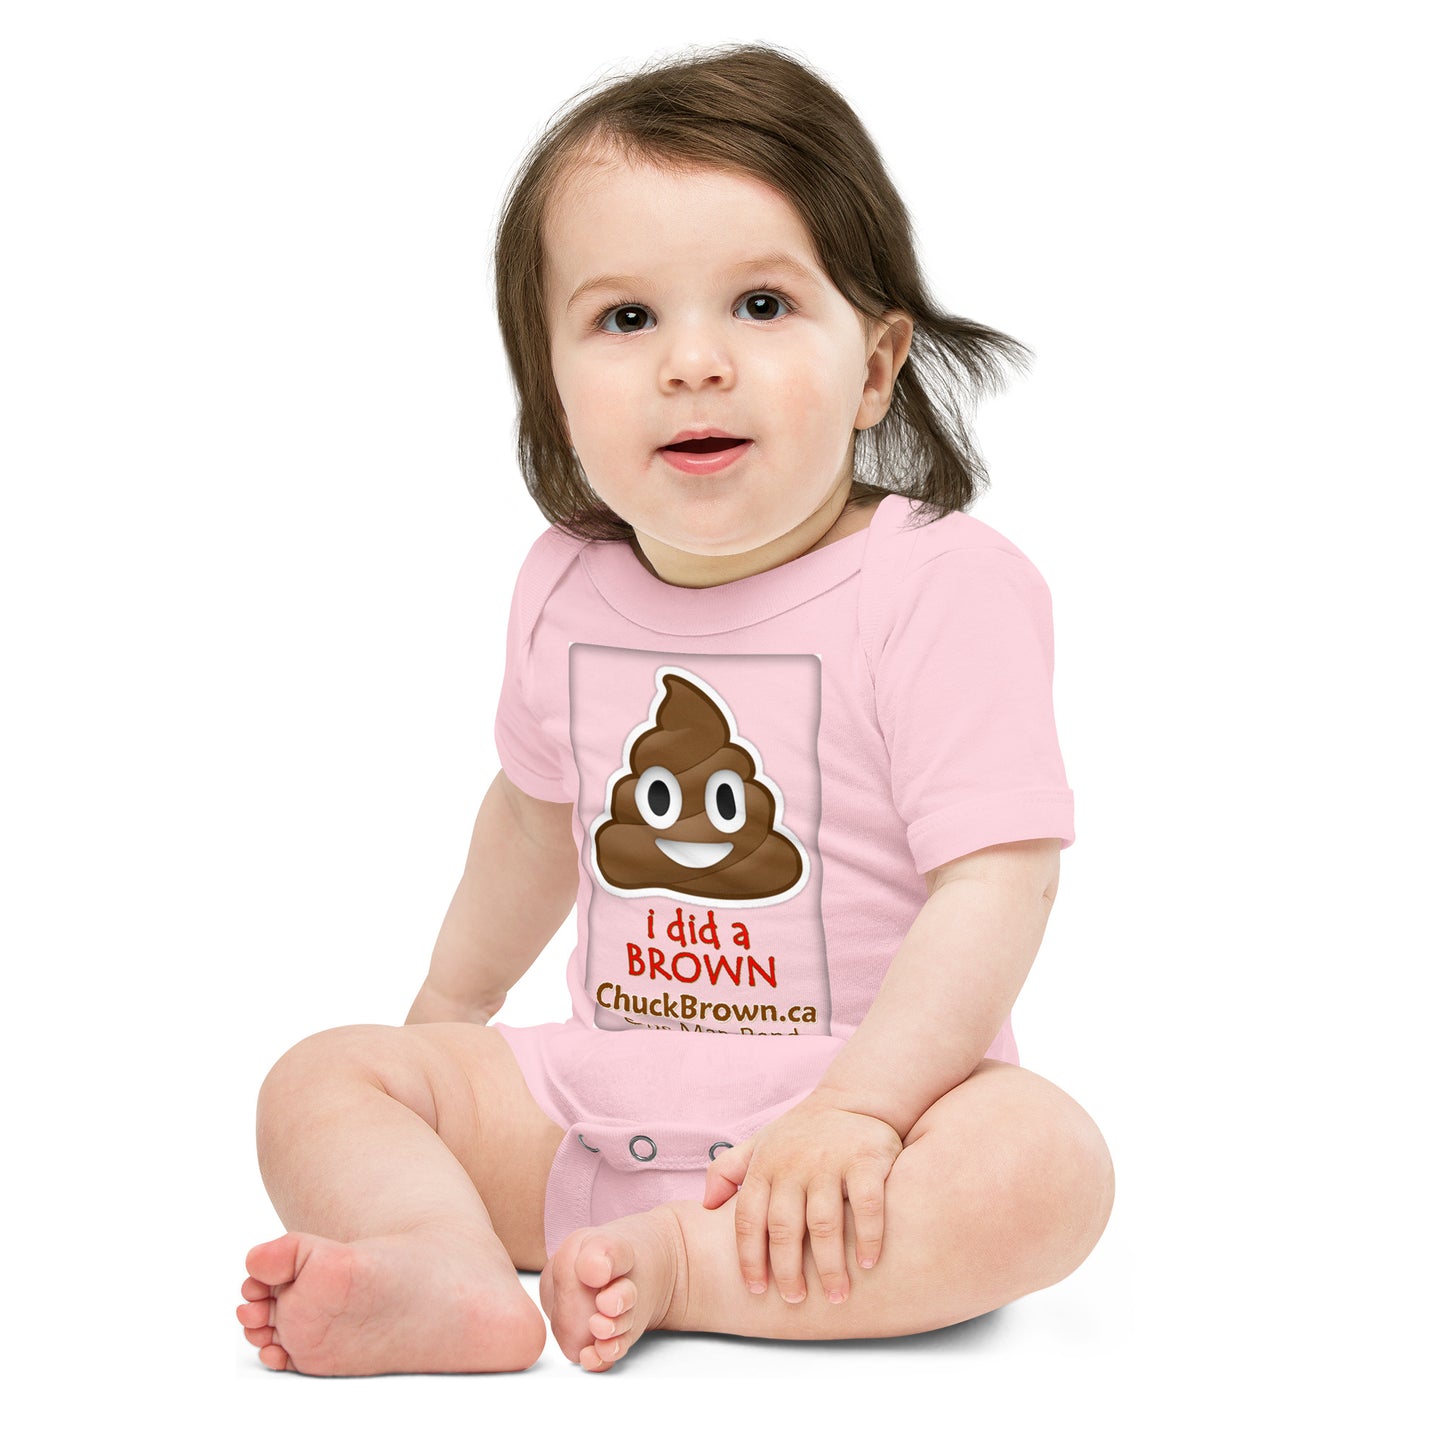 CB Baby-grow: "I did a Brown" in PINK logo